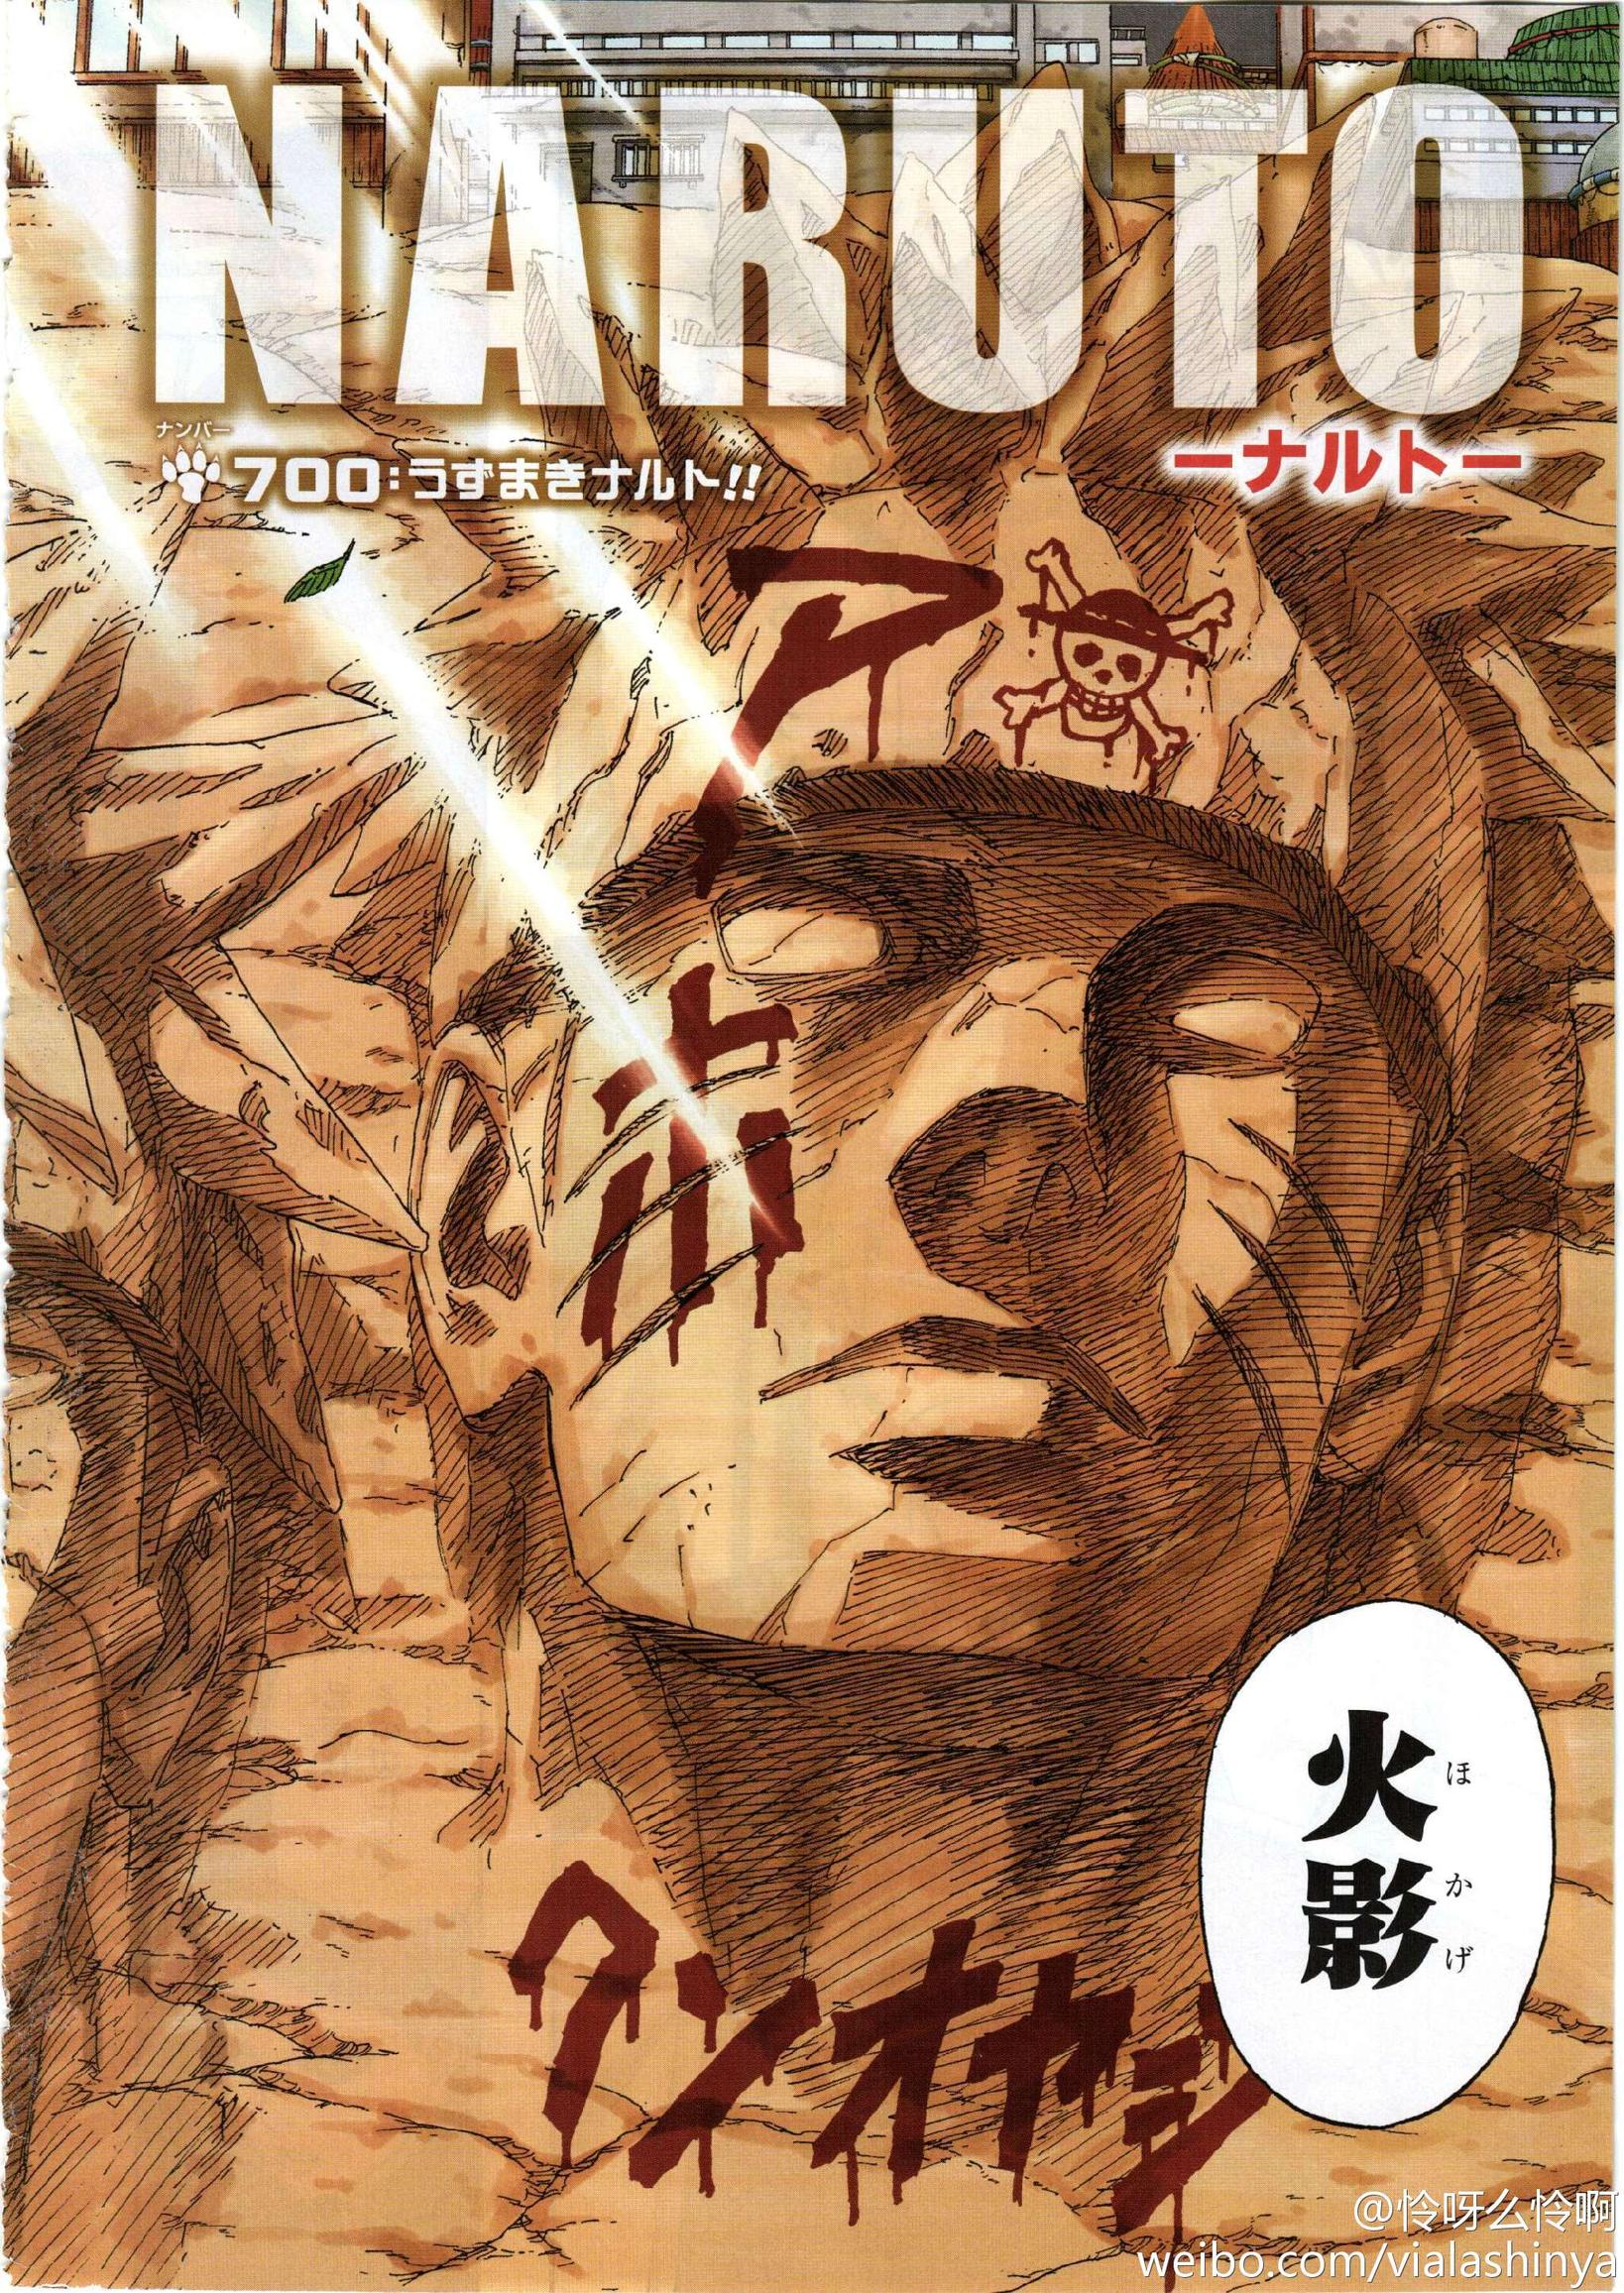 One Piece Chapter 766 S Cover Page Is Dedicated To Naruto Haruhichan